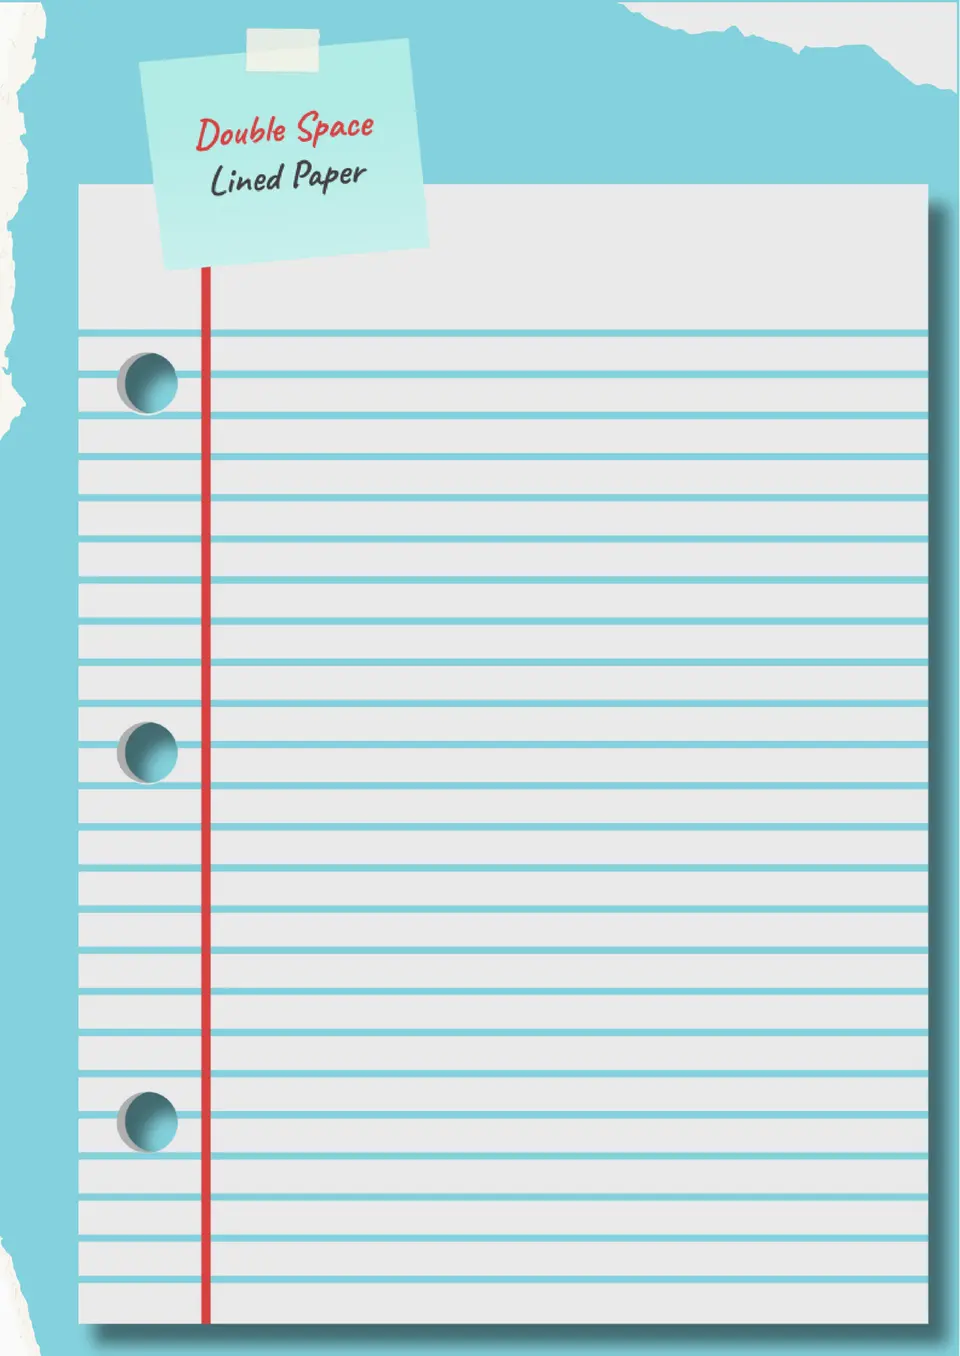 Double Spaced Lined Paper Template